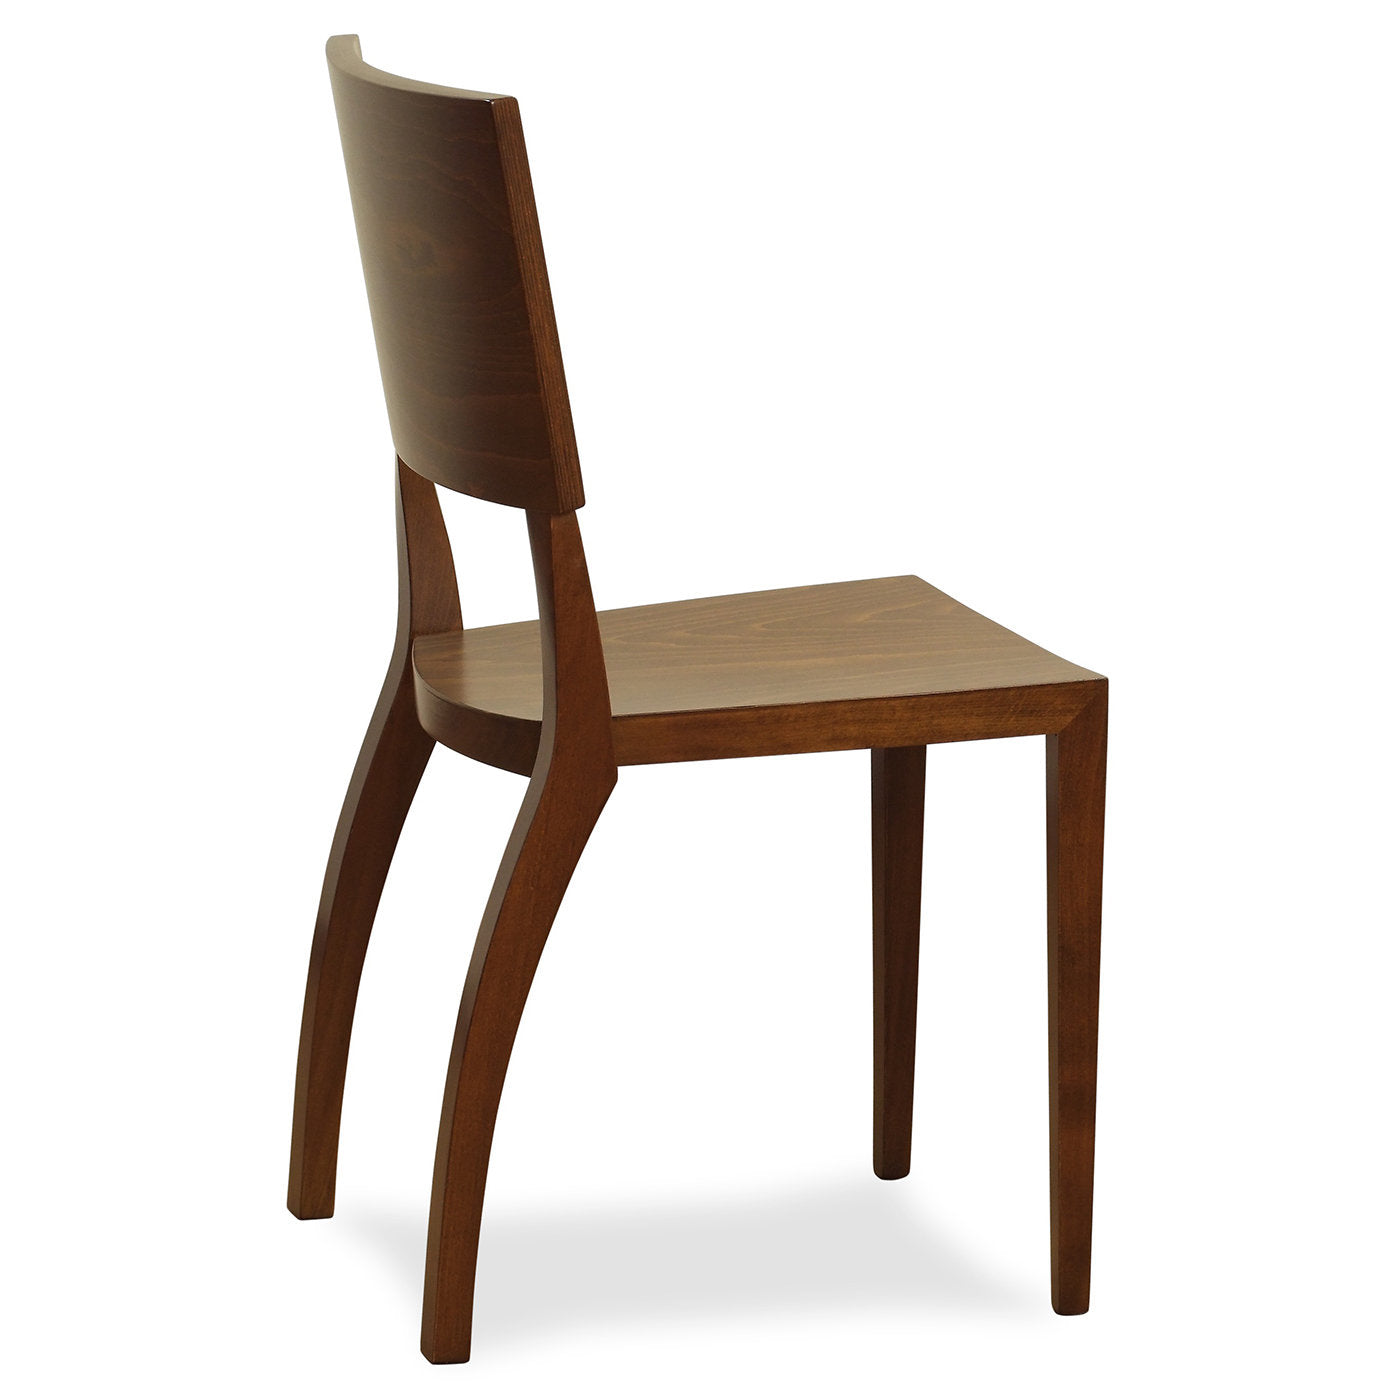 911BPL Set of 2 Chairs - Alternative view 1